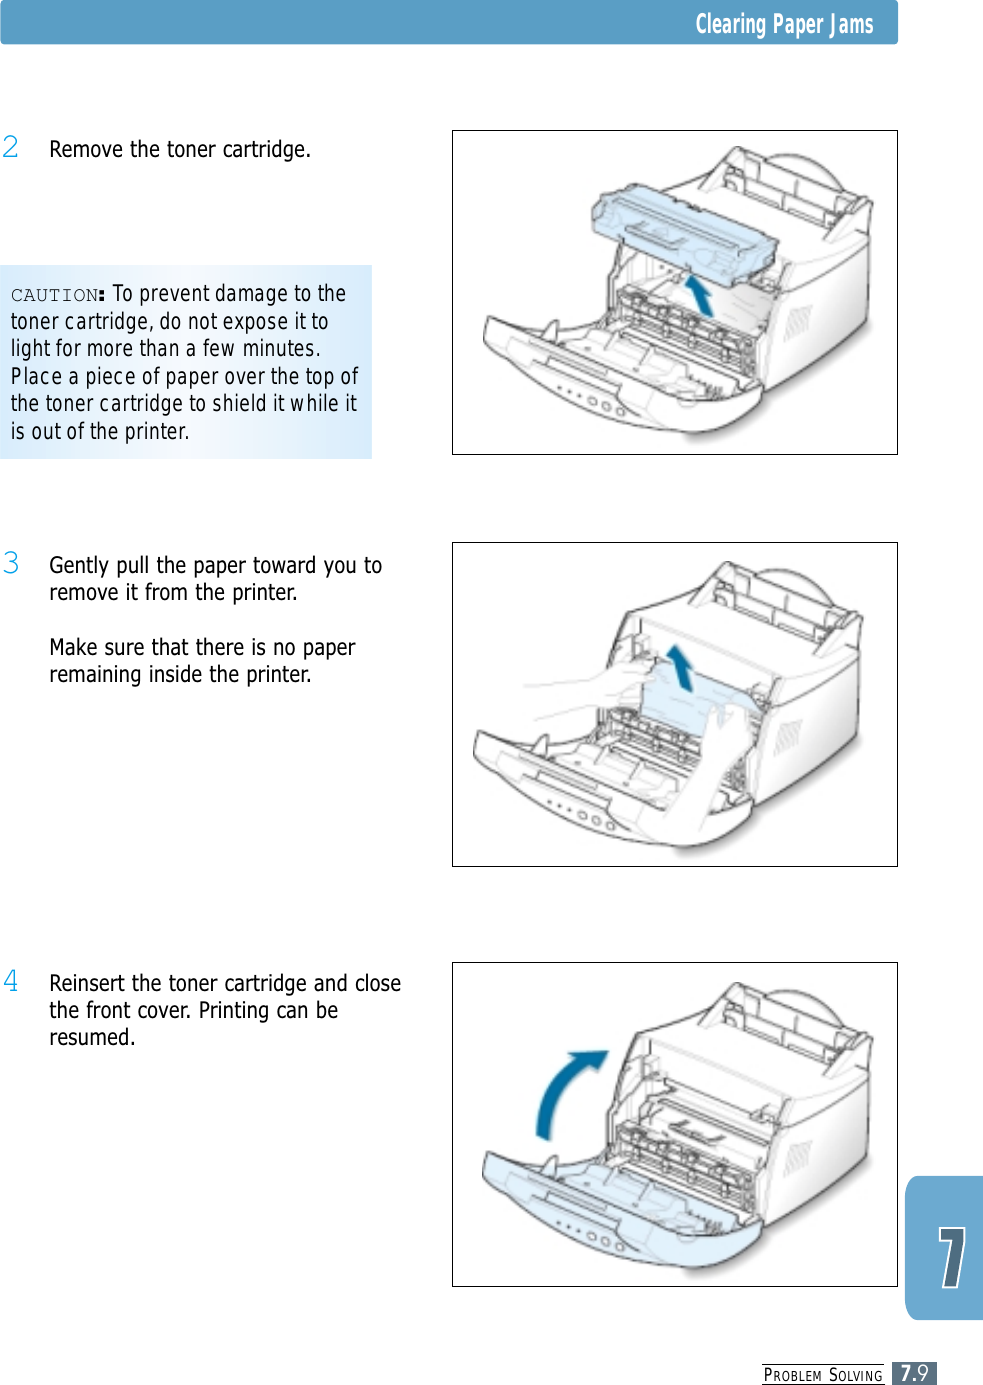 PROBLEM SOLVING7.9Clearing Paper Jams4 Reinsert the toner cartridge and closethe front cover. Printing can beresumed.3 Gently pull the paper toward you toremove it from the printer.Make sure that there is no paperremaining inside the printer.CAUTION:To prevent damage to thetoner cartridge, do not expose it tolight for more than a few minutes.Place a piece of paper over the top ofthe toner cartridge to shield it while itis out of the printer.2 Remove the toner cartridge.